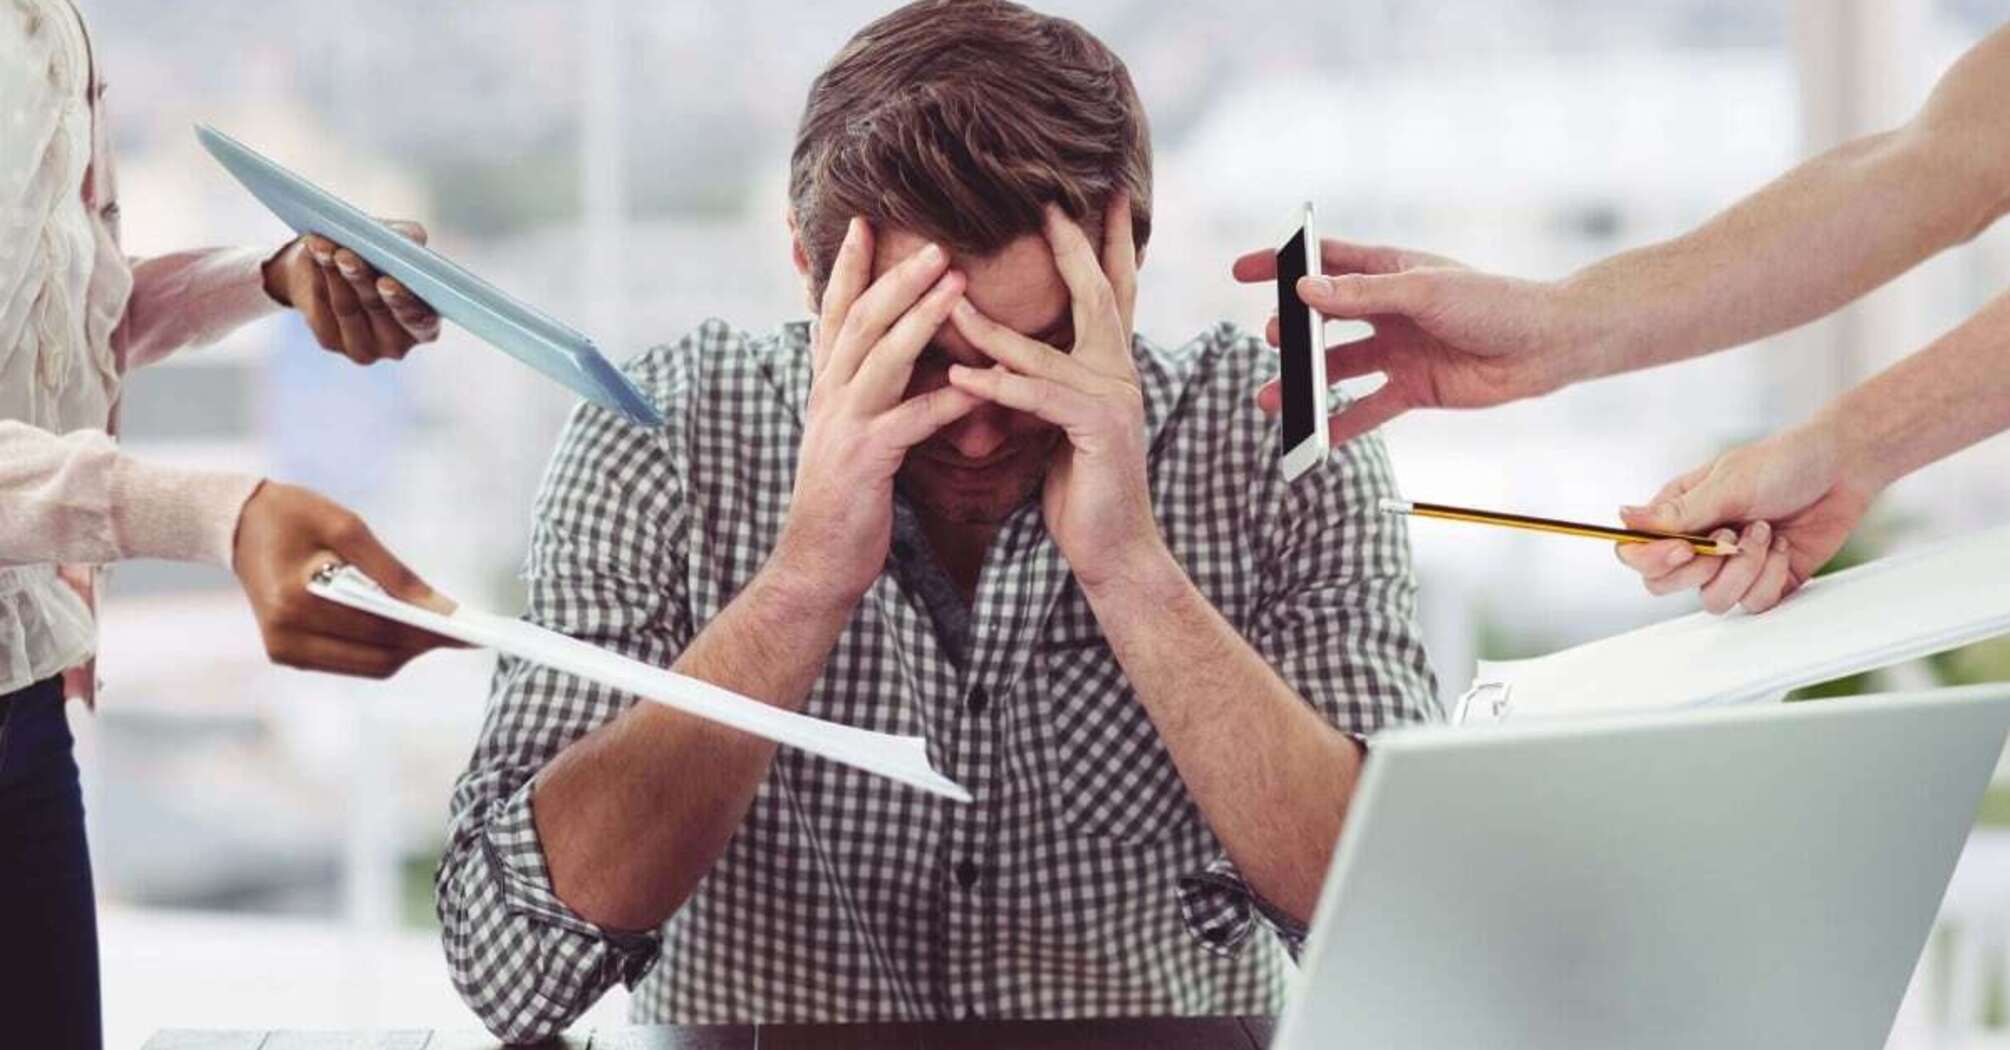 What is the danger of stress in the workplace